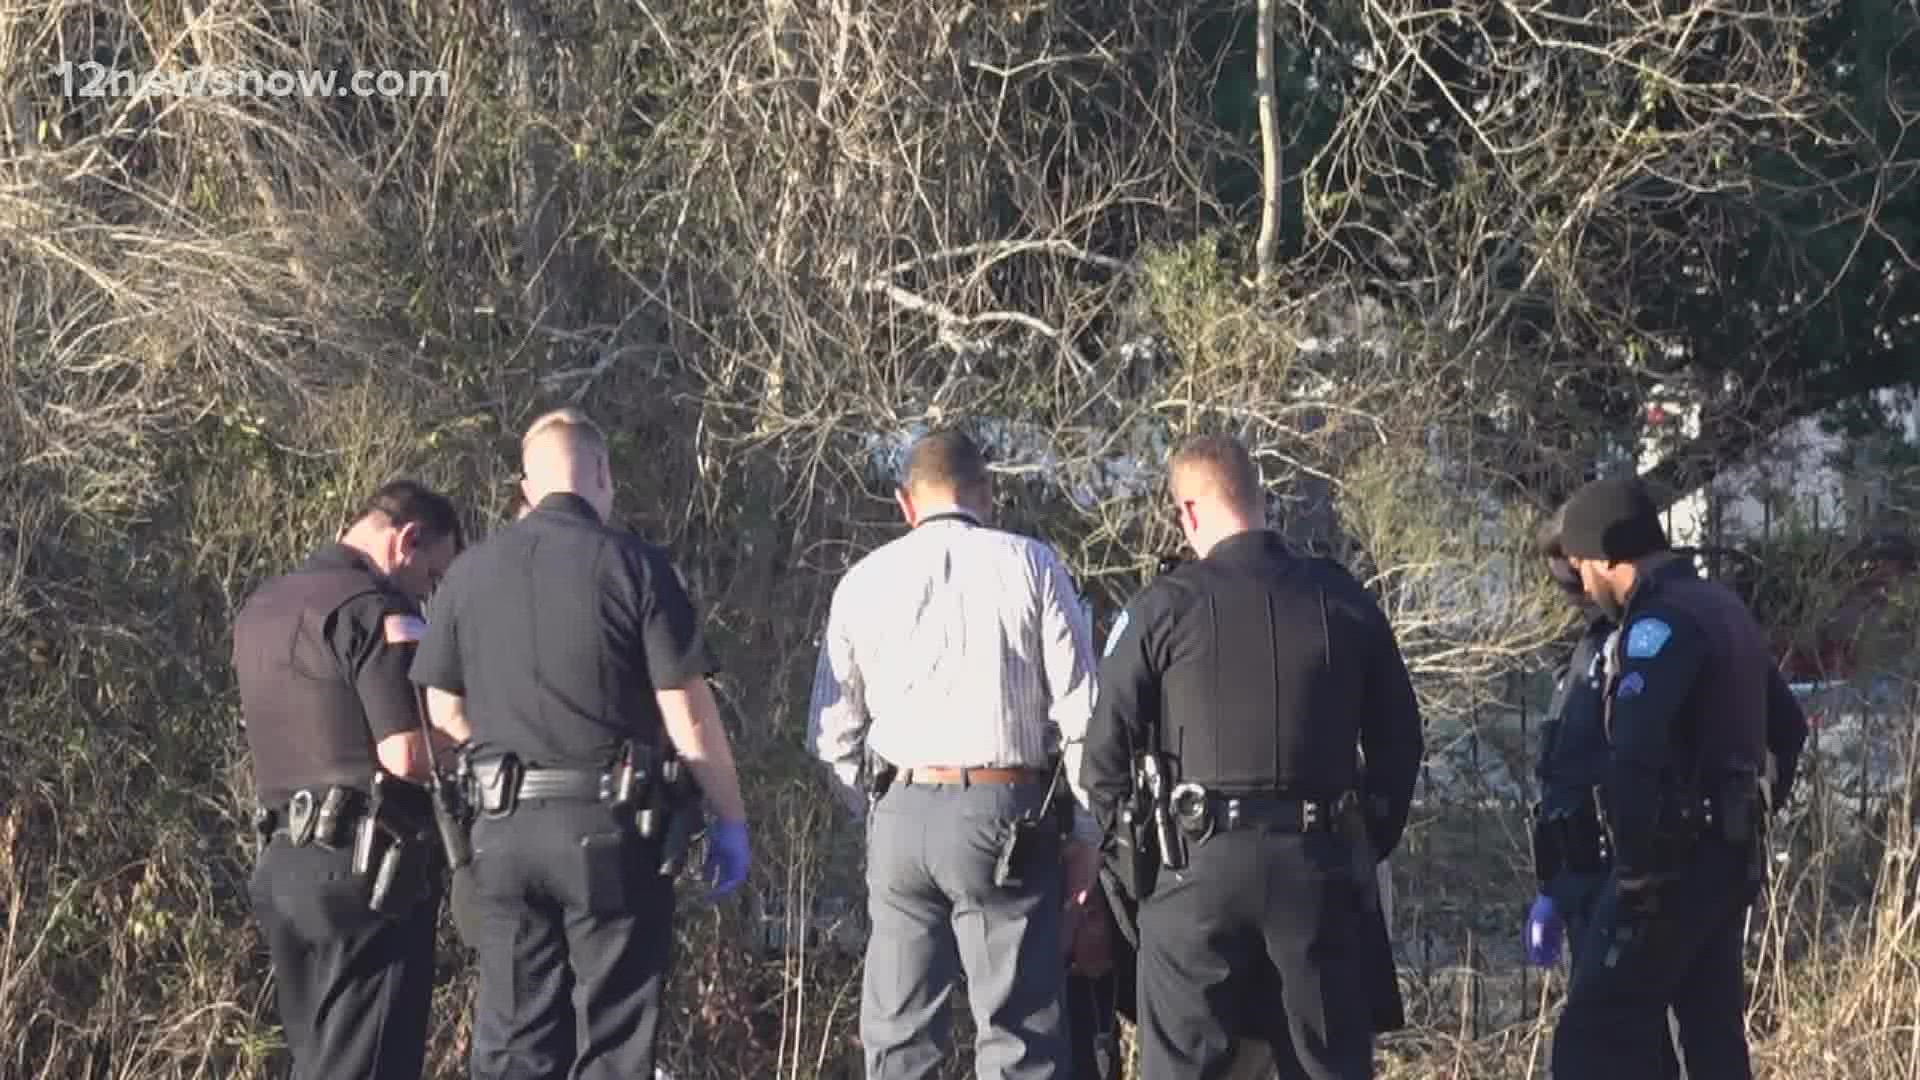 Beaumont Police discovered a body in the 6000 block of Muela Creek Drive behind Kohls while responding to a call.